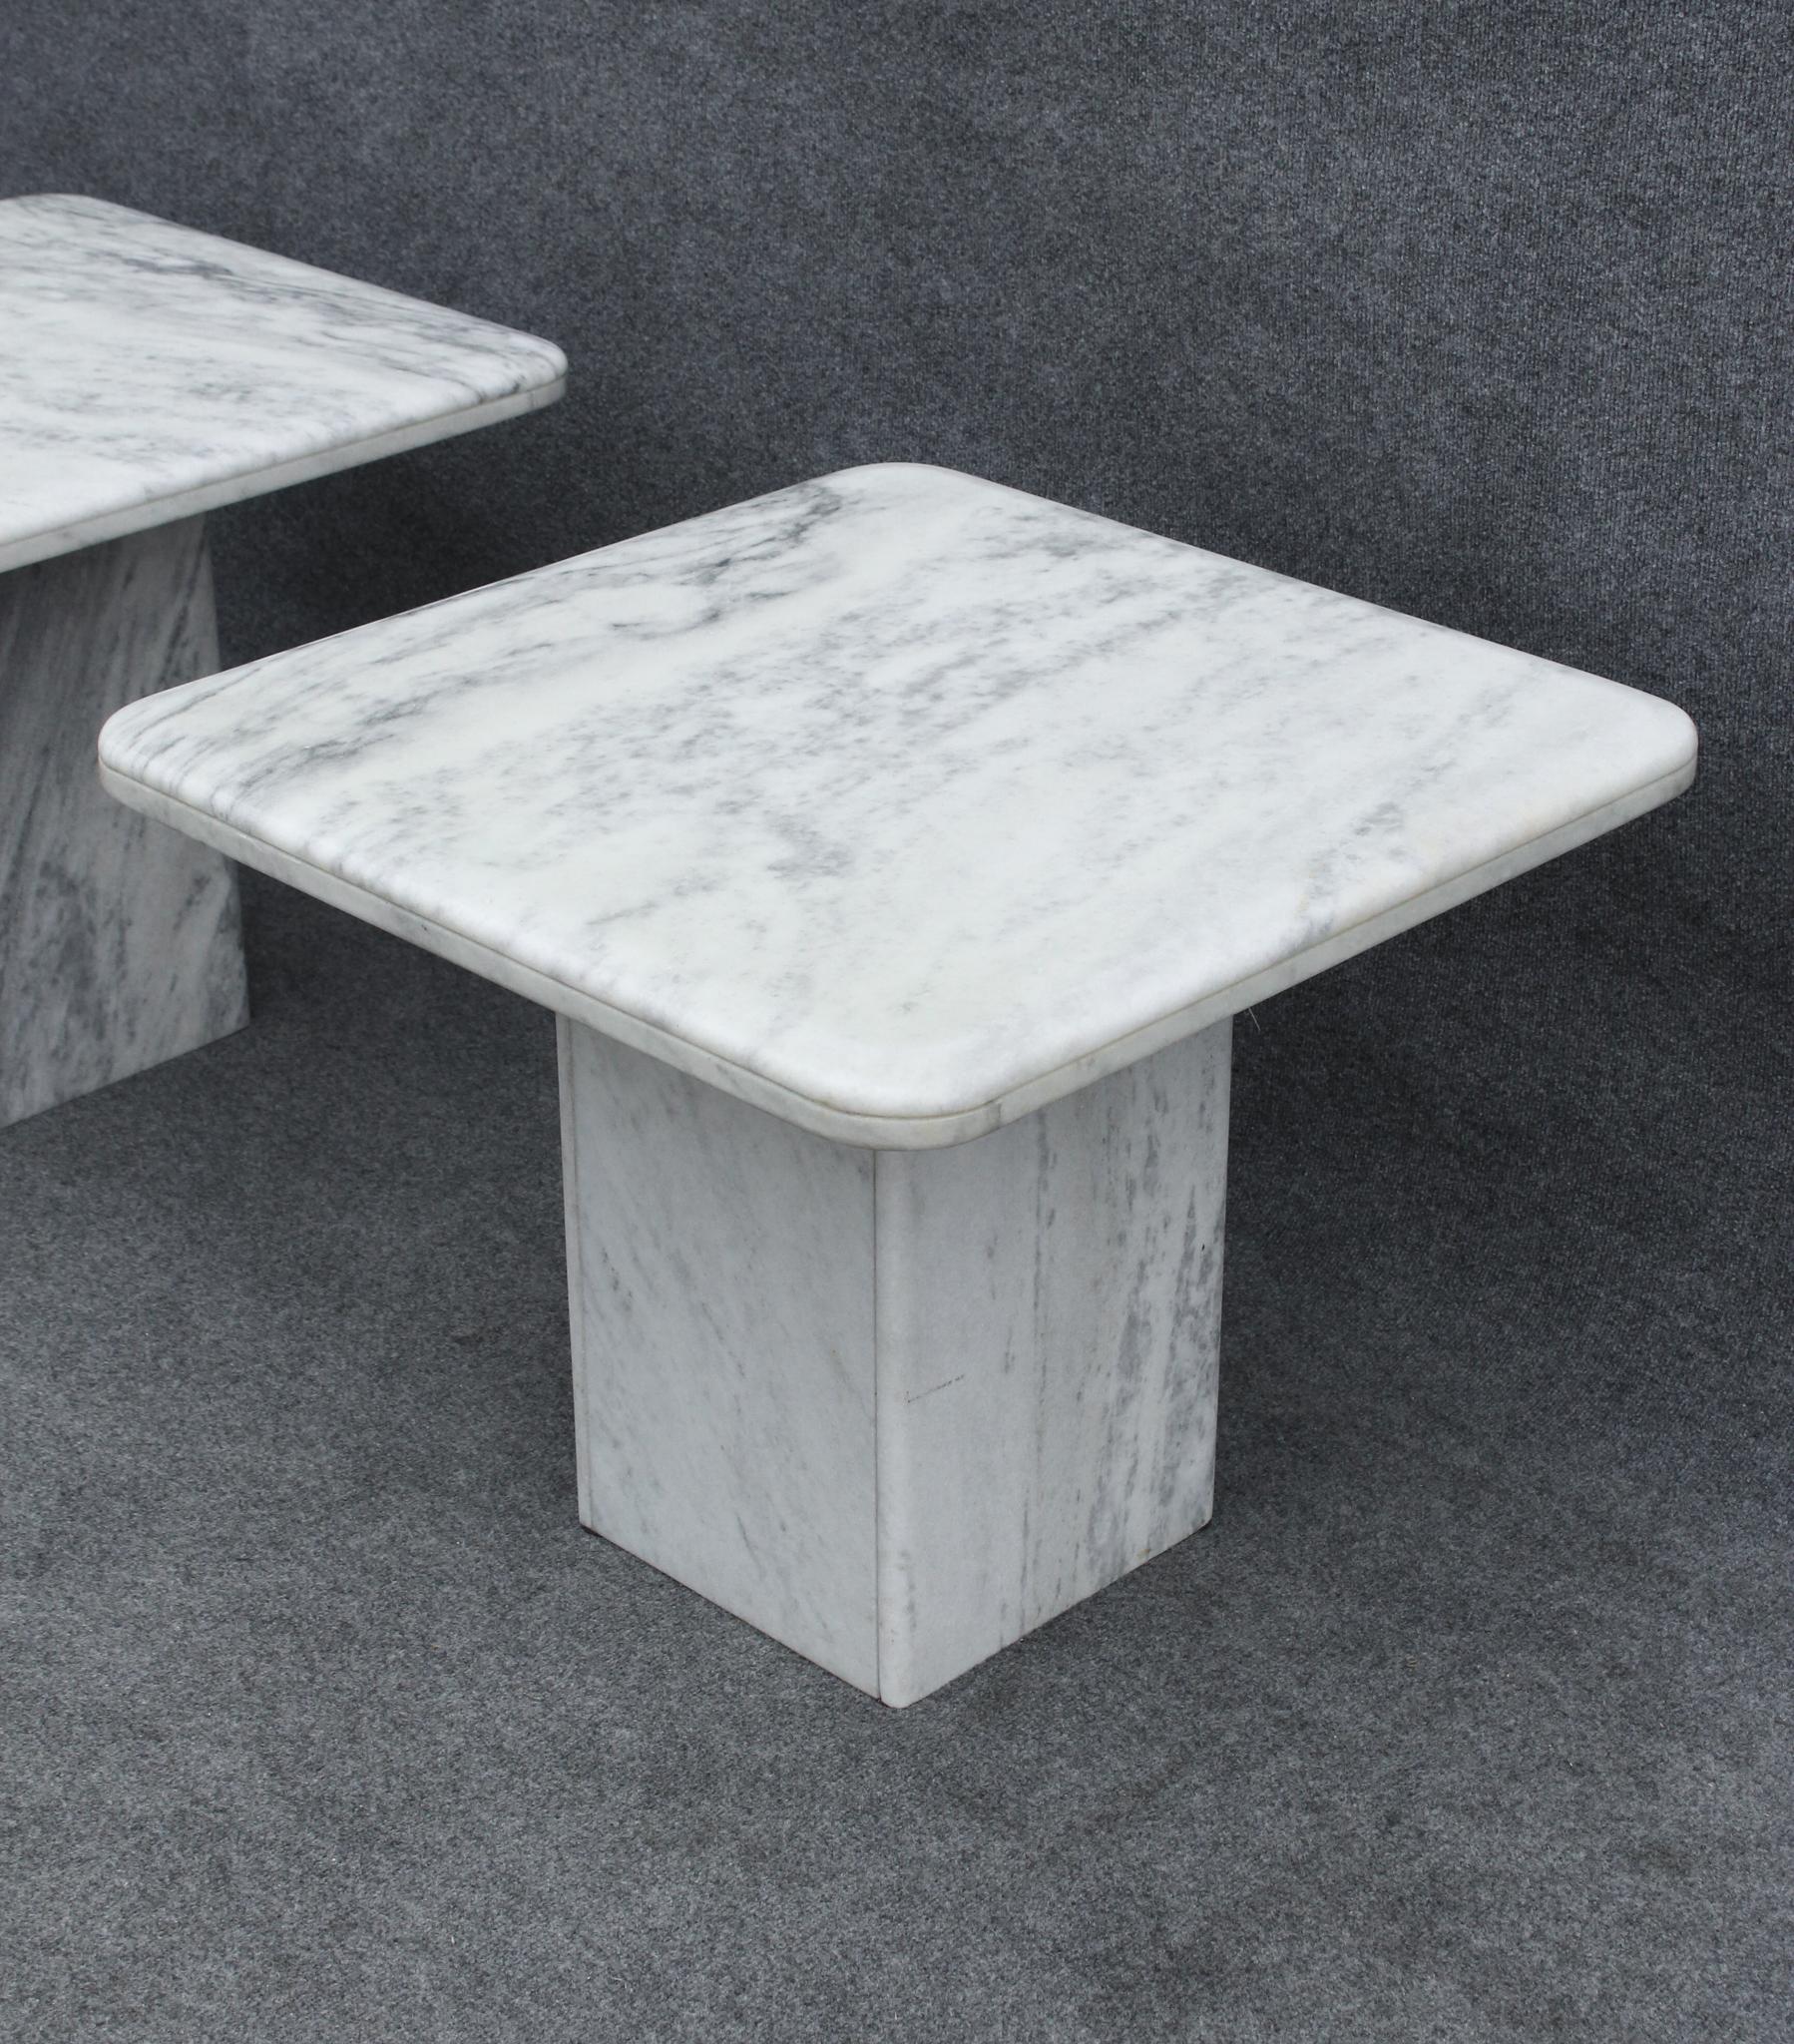 Pair of Italian Side Tables in White Marble With Grey Veining 1970s For Sale 1